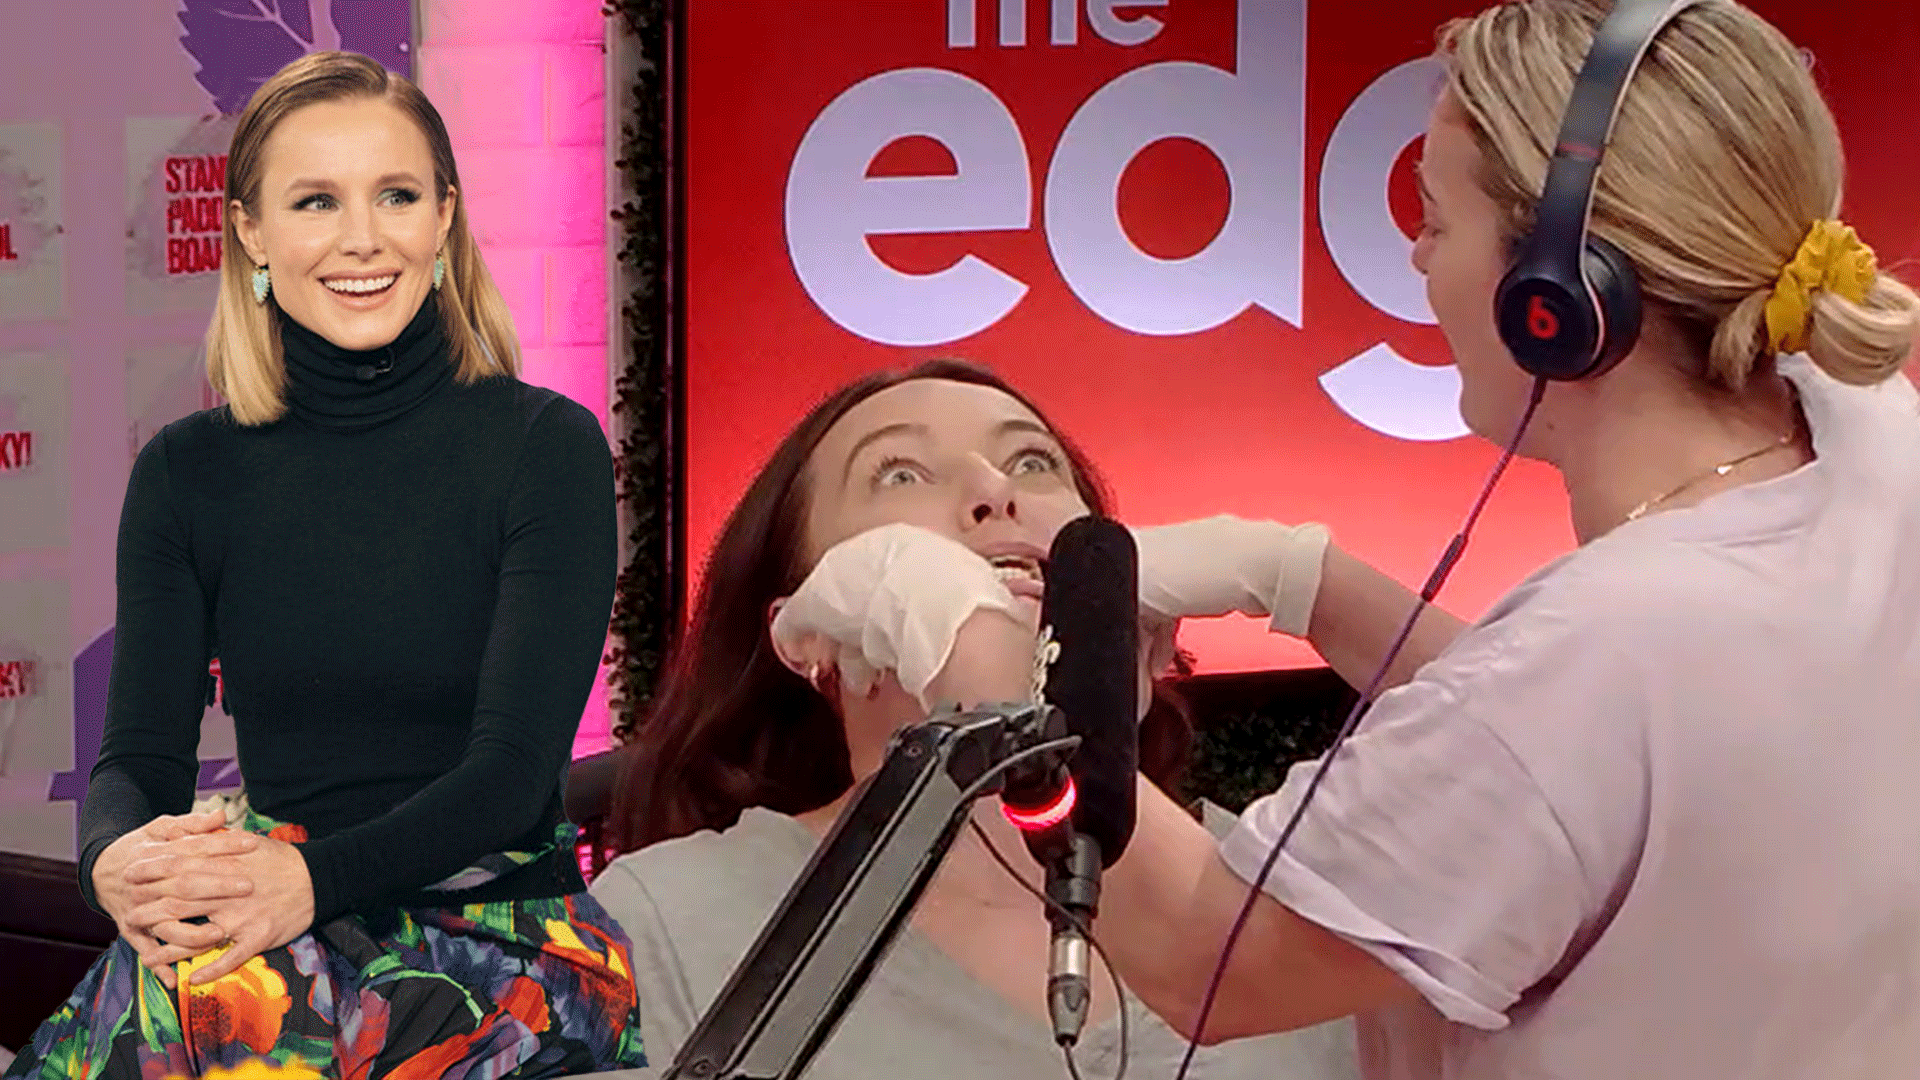 Sharyn gives Steph Kristen Bell's 'life changing' viral mouth massage 